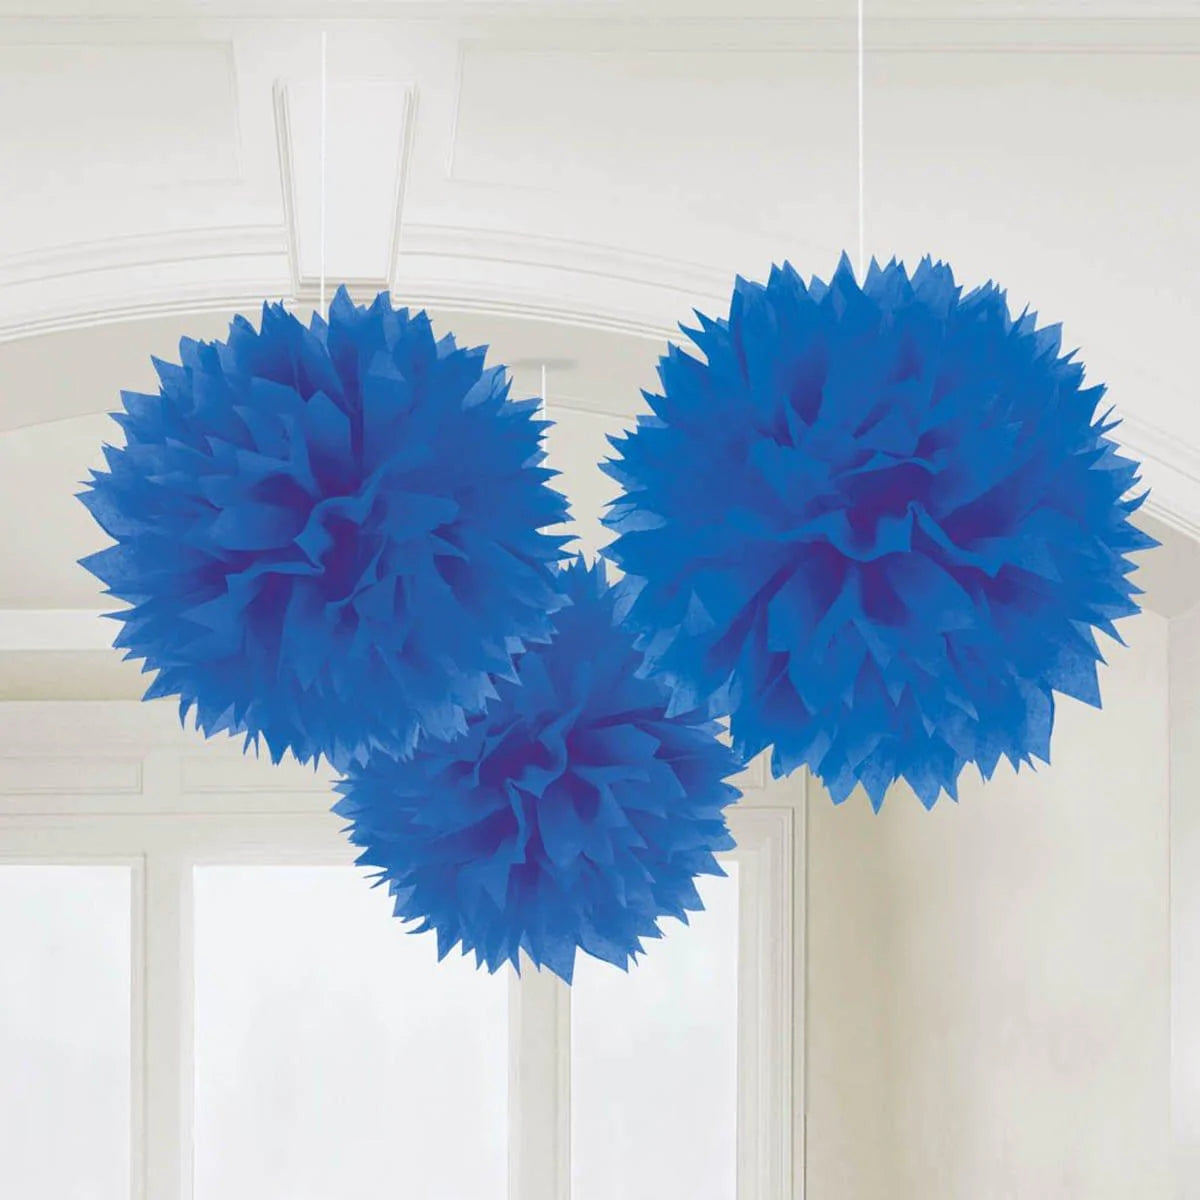 Blue & White Fluffy Decorations